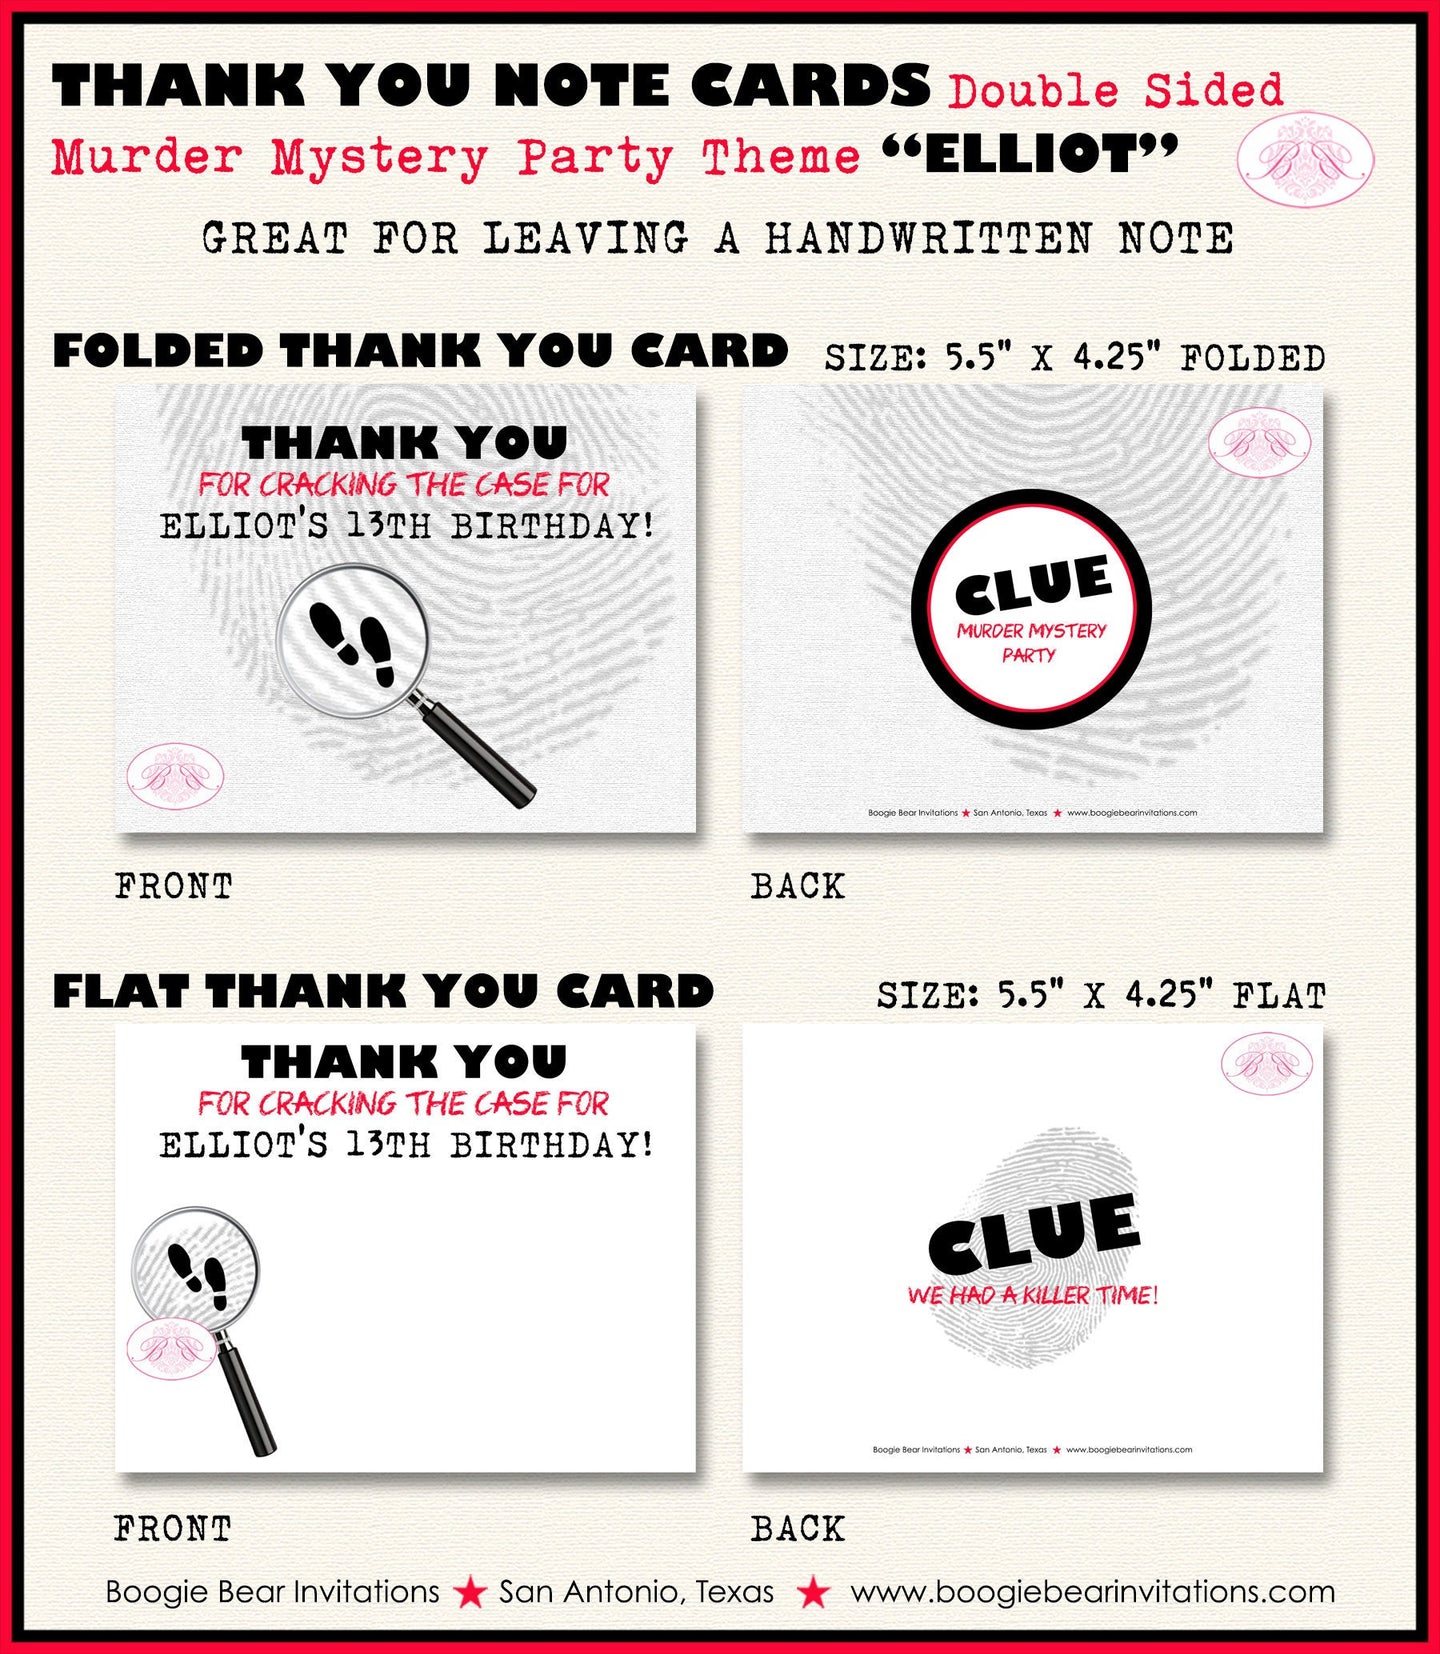 Murder Mystery Birthday Party Thank You Card op Secret Costume Vintage Clue Mission Private Eye Boogie Bear Invitations Elliot Theme Printed